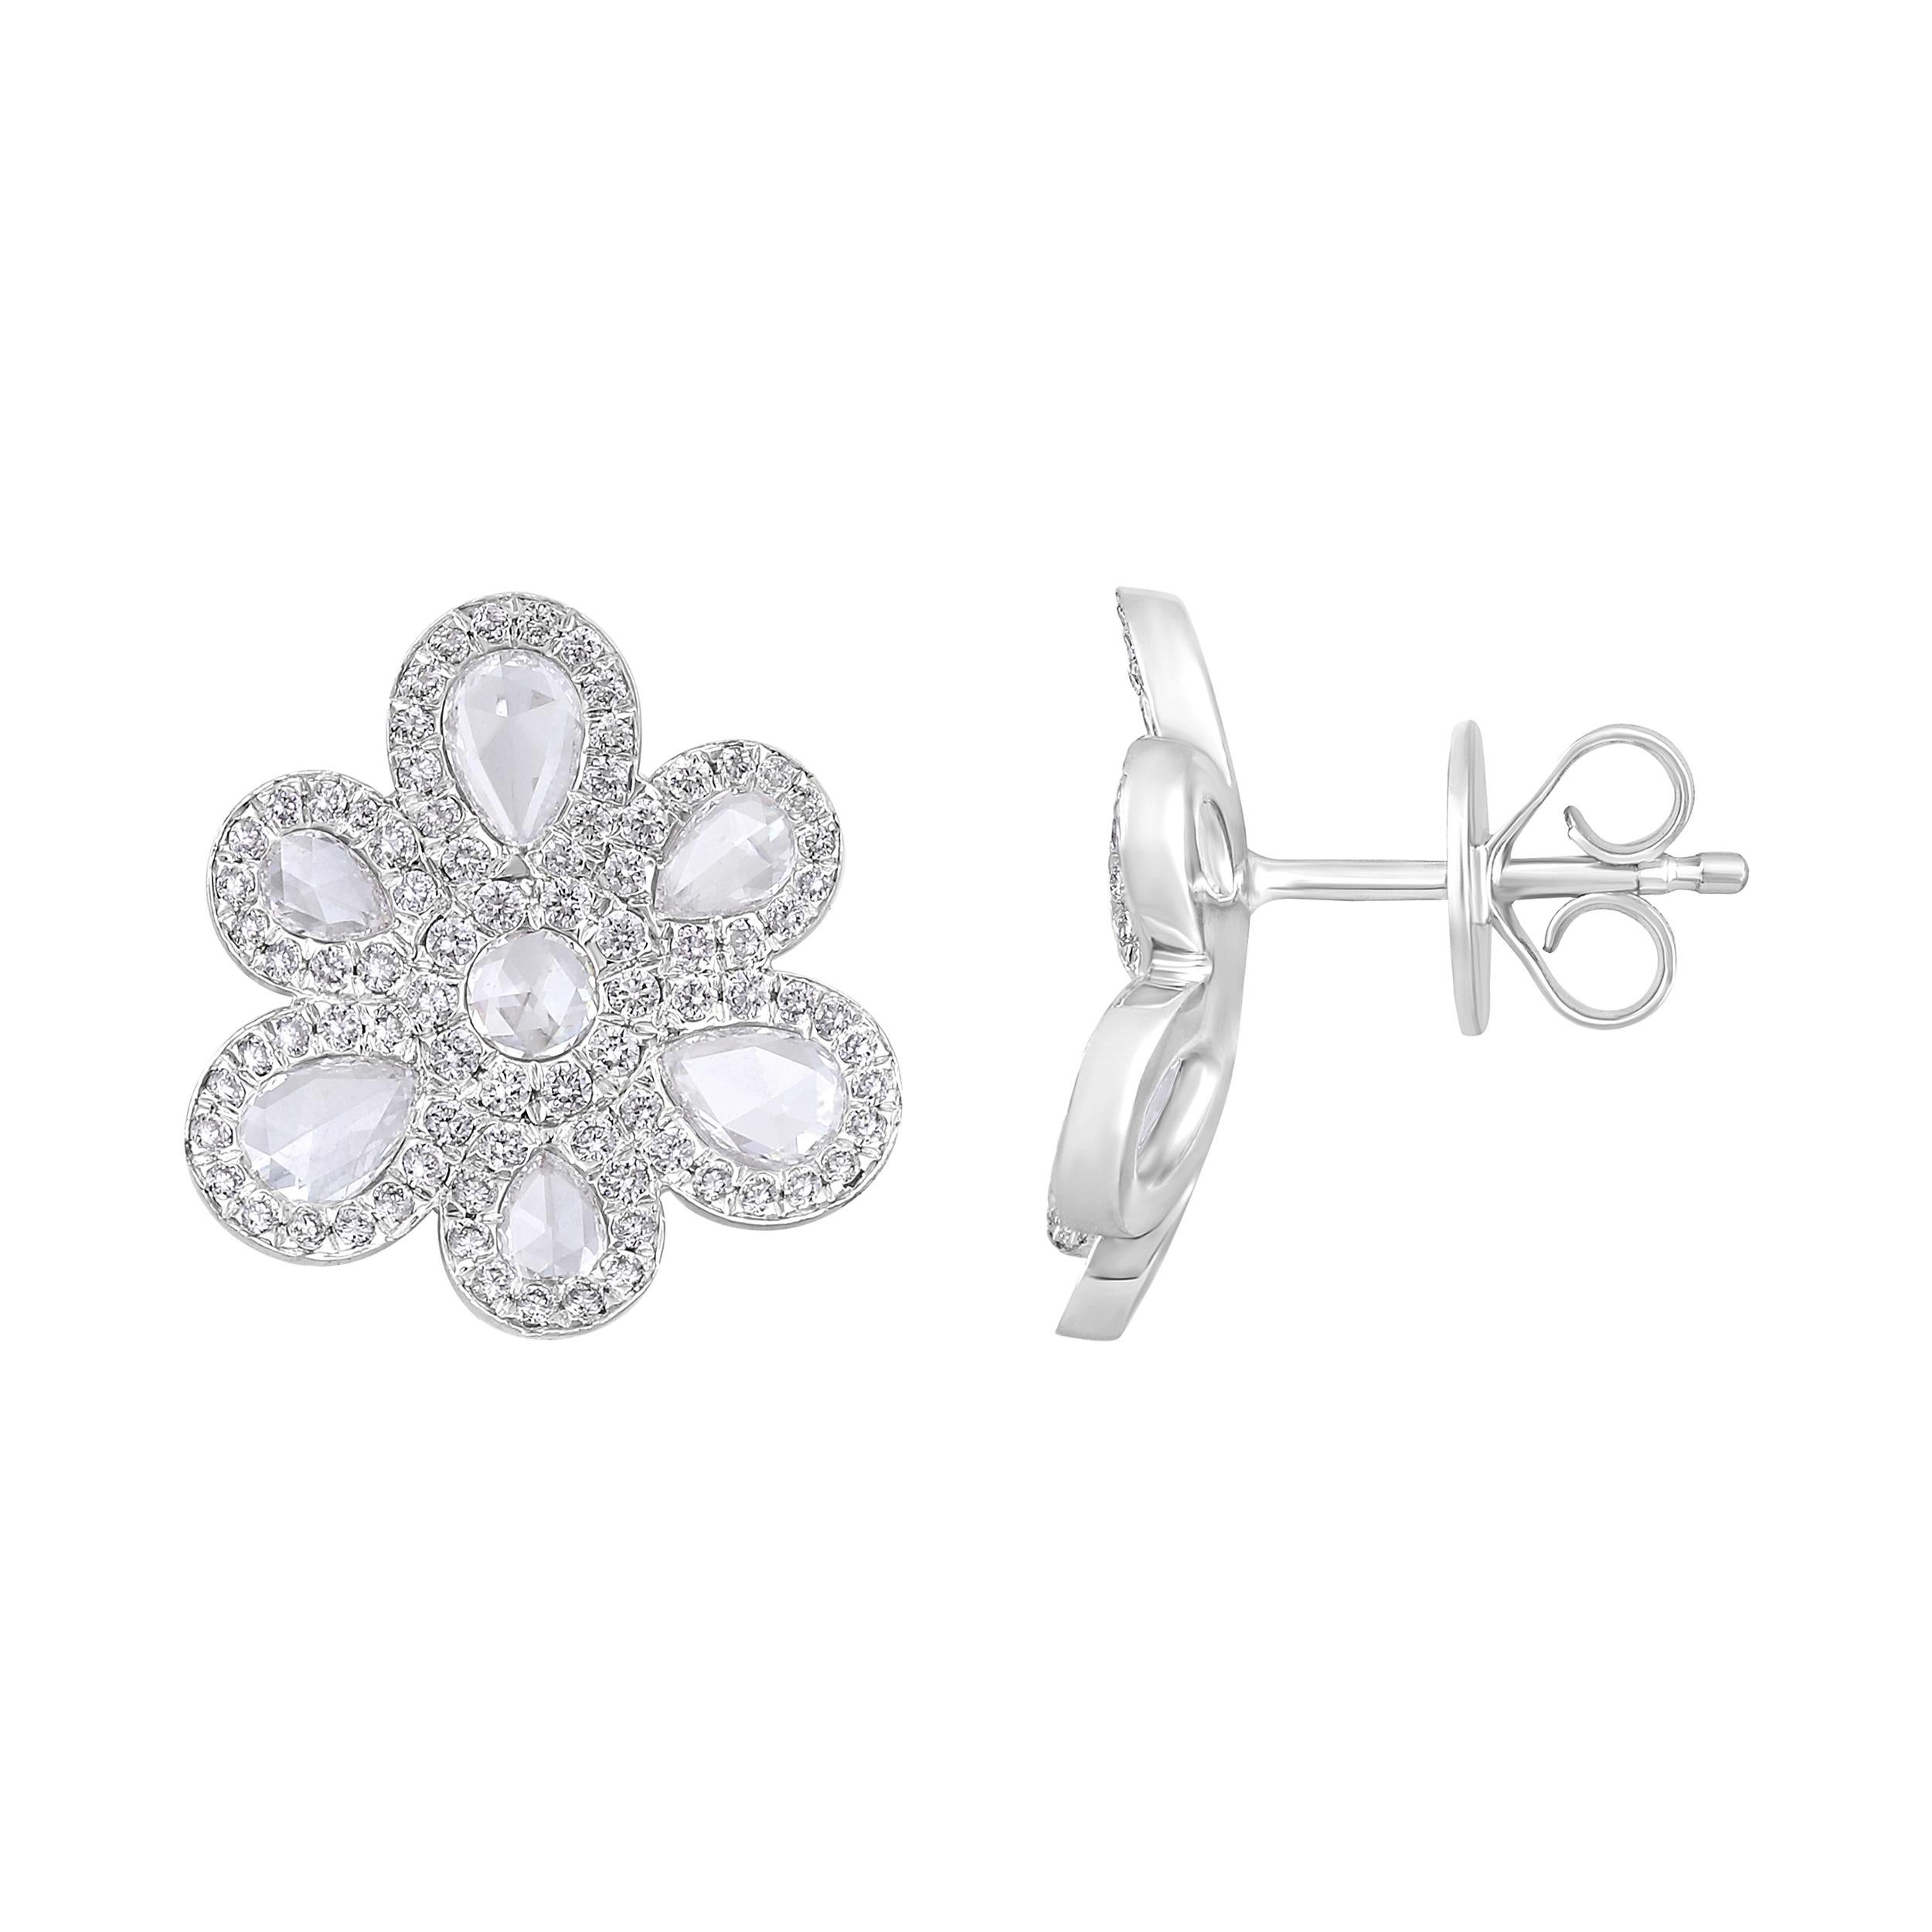 Crafted in 5.898 grams of 18K White Gold, the earrings contain 14 stones of Rose Cut Natural Diamonds with a total of 0.99 carat in E-F color and VVS-VS clarity combined with 162 stones of Round Natural Diamonds with a total of 0.64 carat in E-F